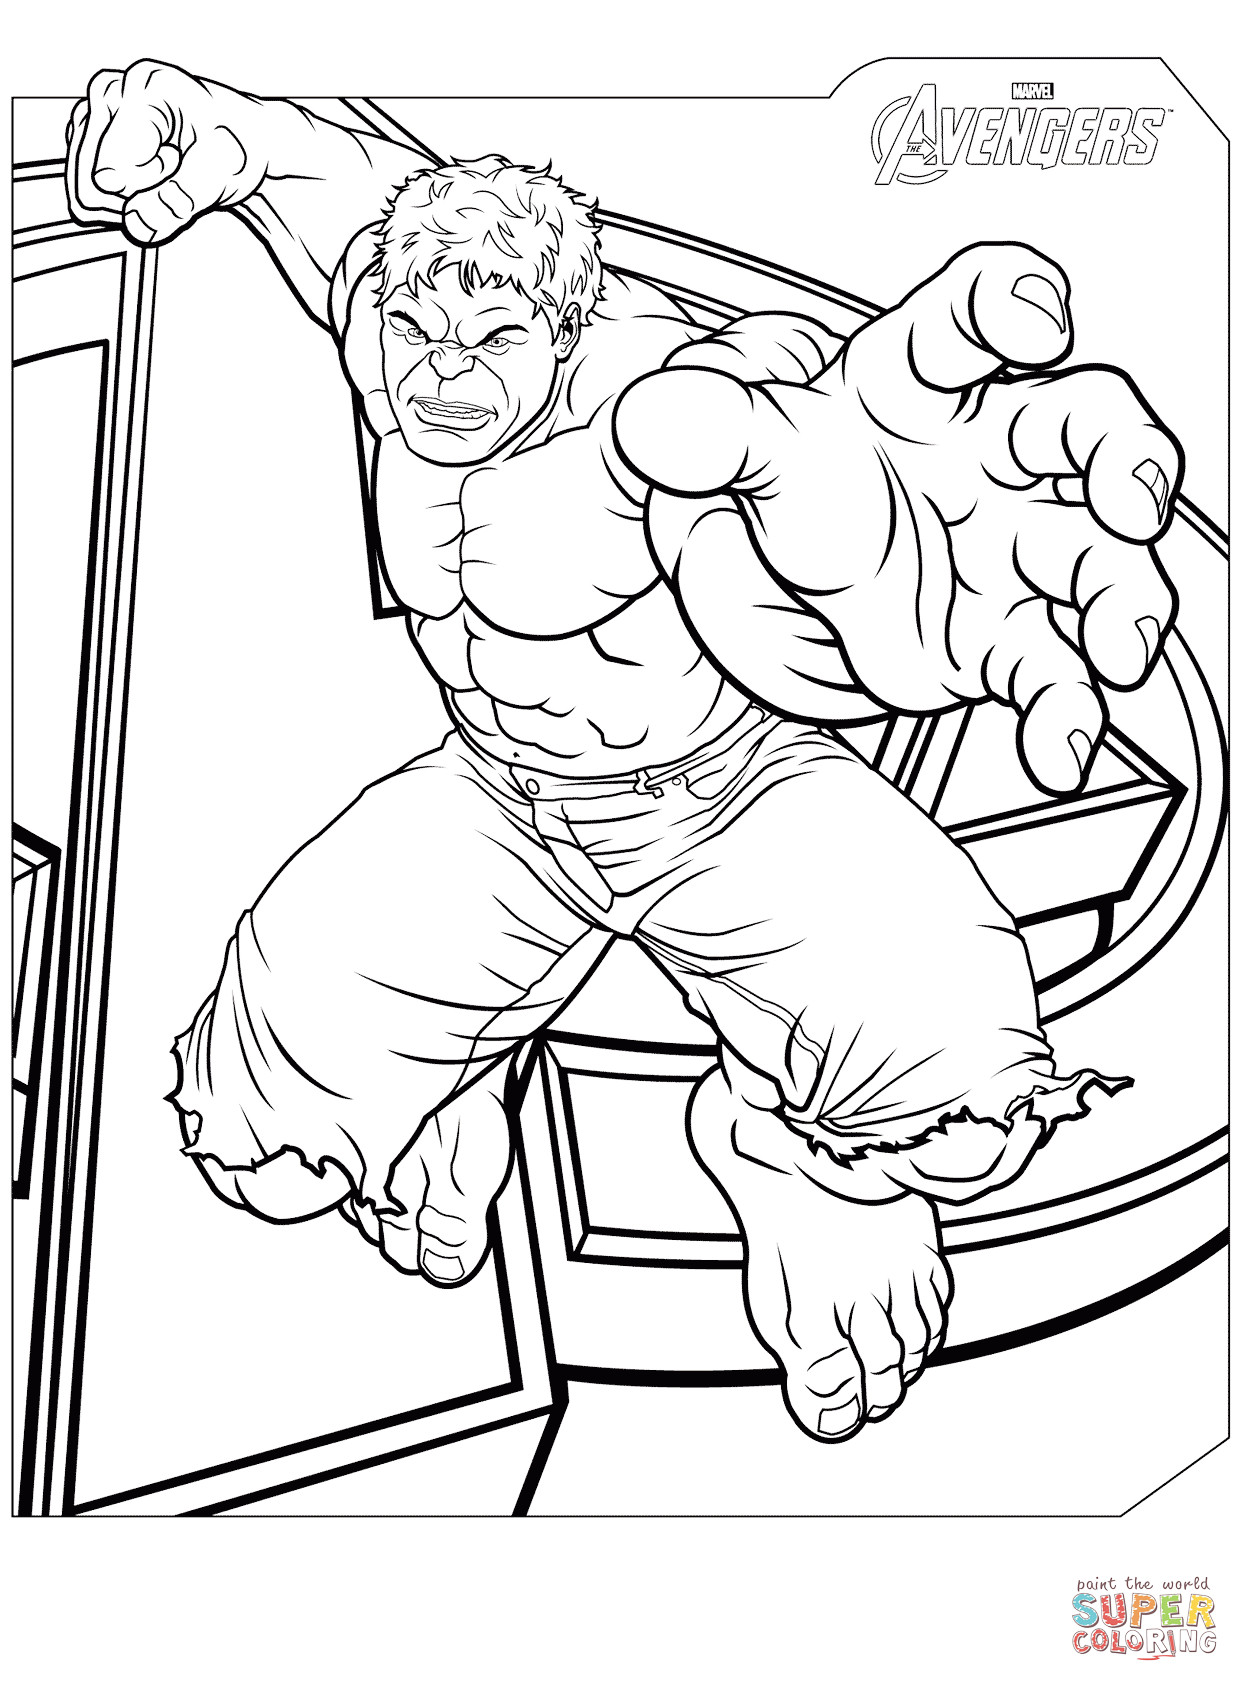 Avengers Printable Coloring Pages
 Avengers Hulk coloring page